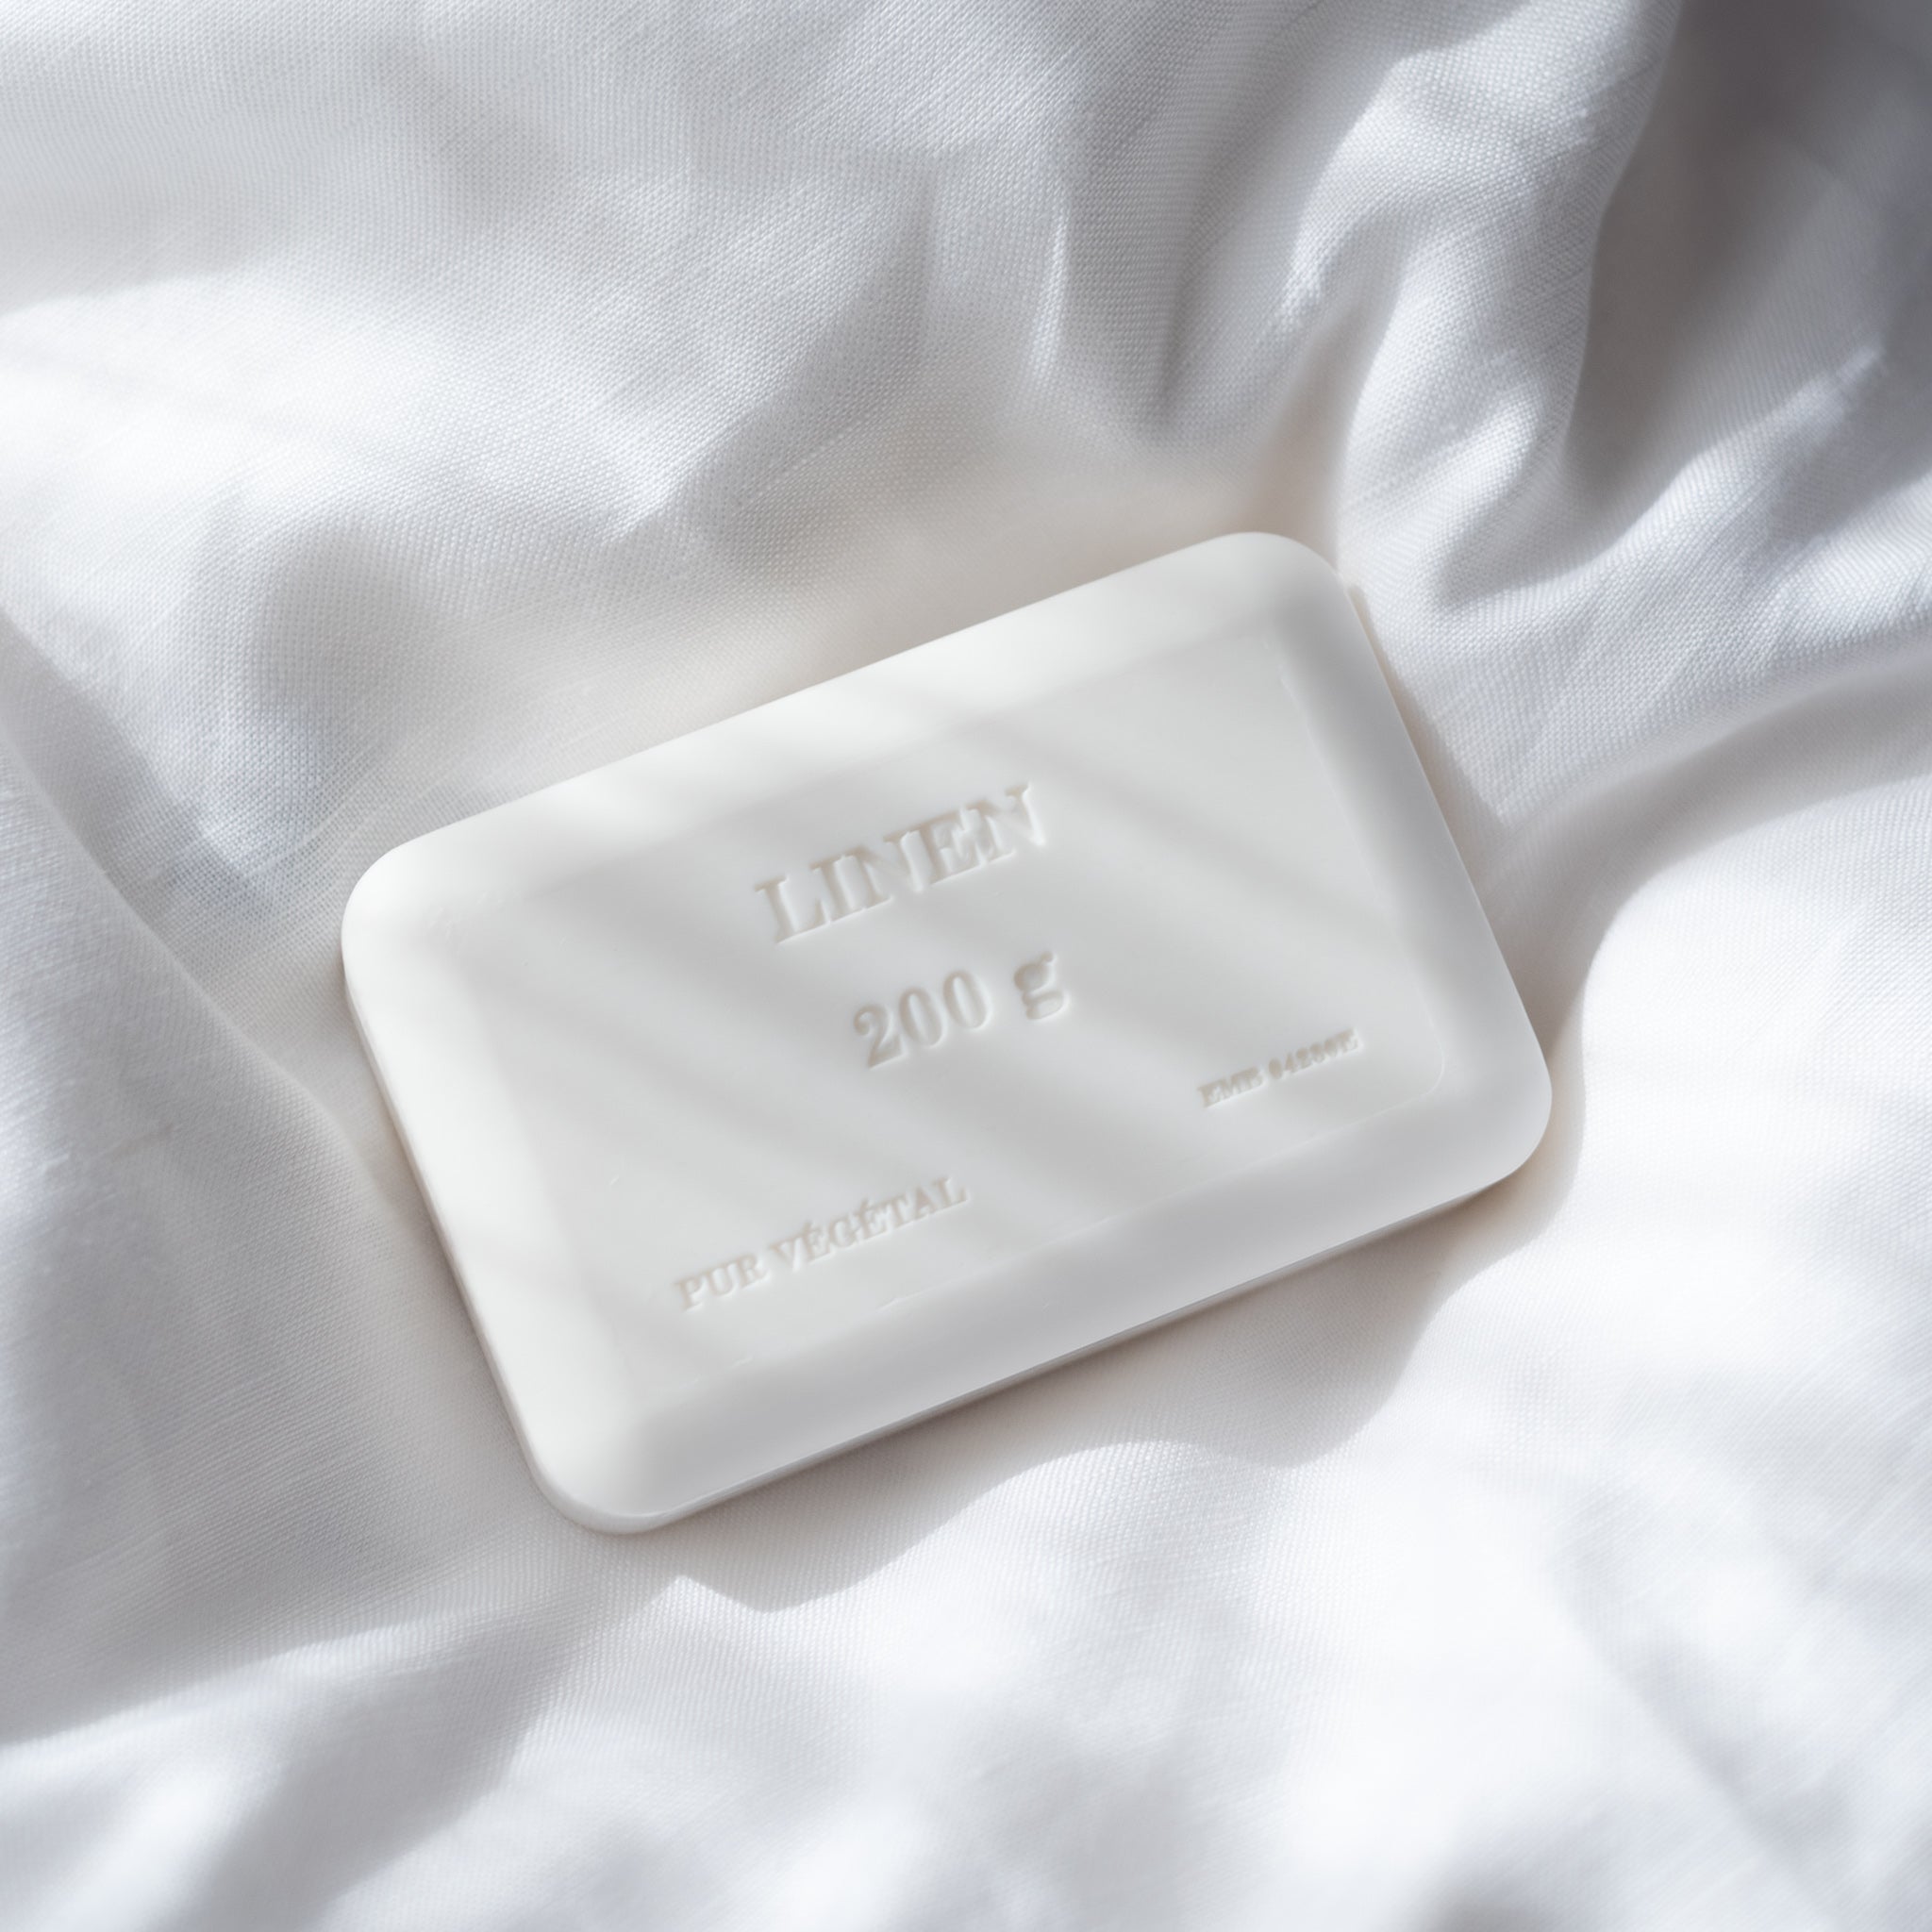 Lothantique French Bar Soap in Linen Scent 